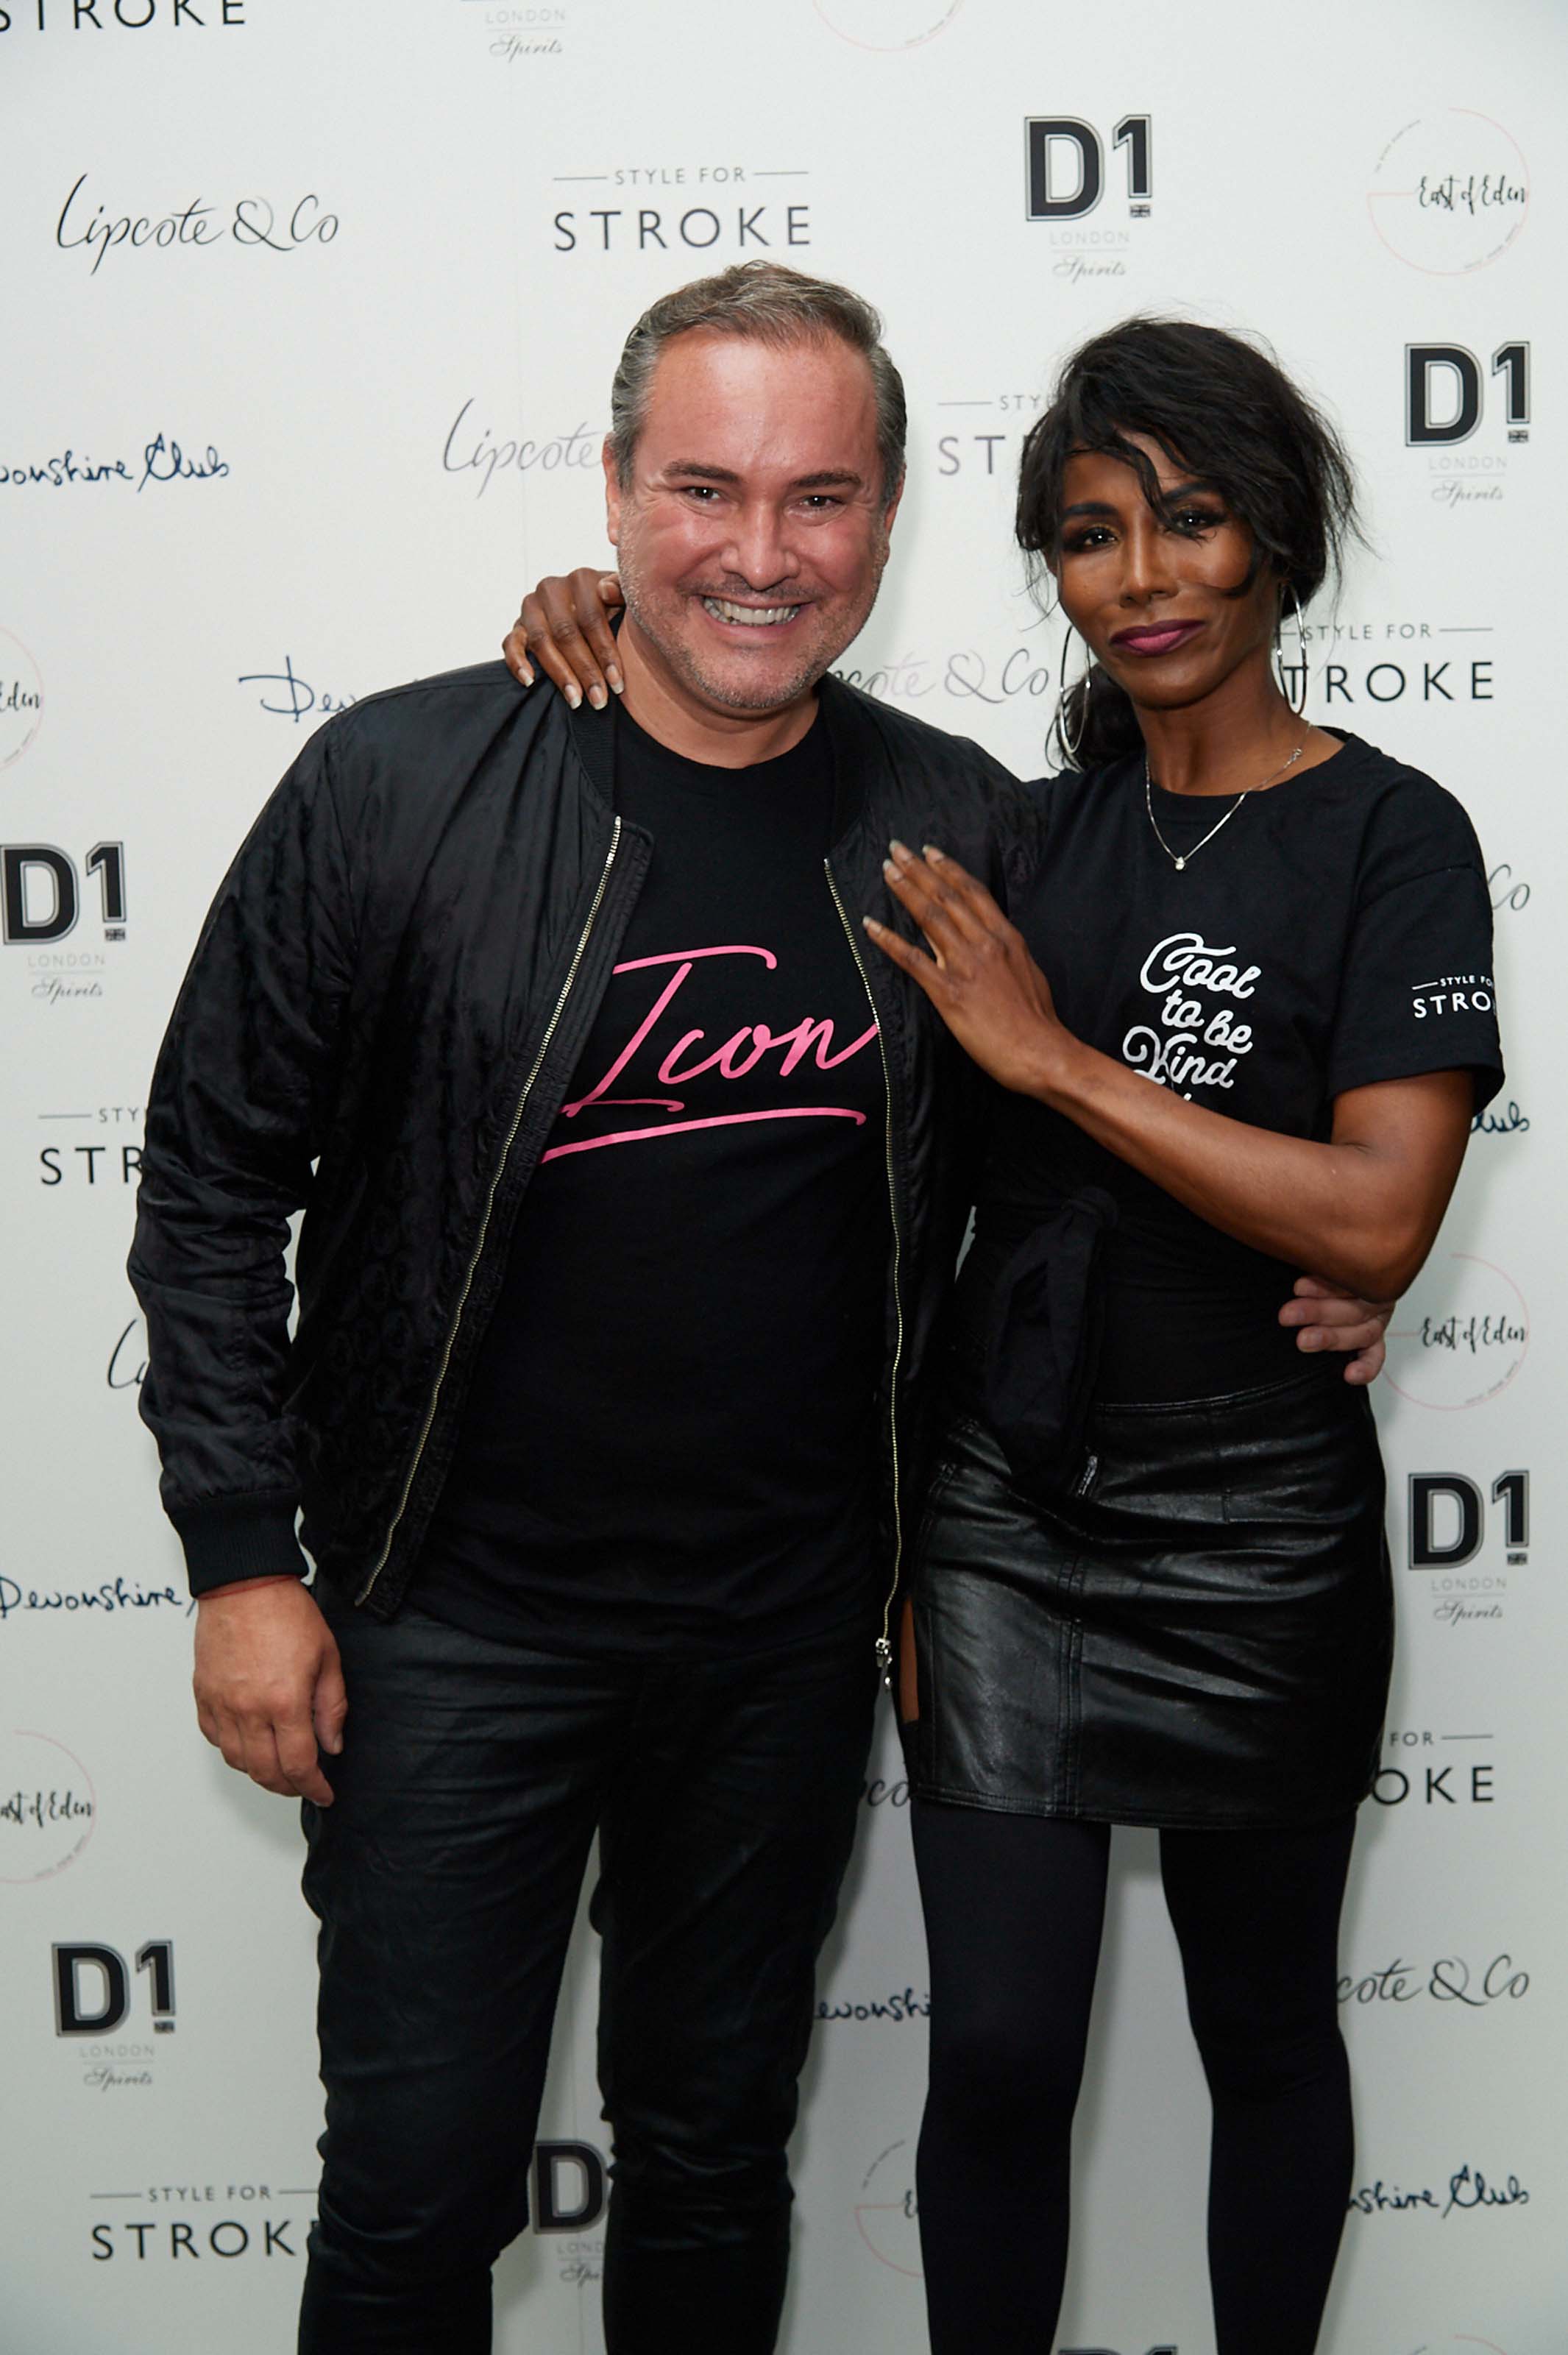 Sinitta attends Style for Stroke Launch Party